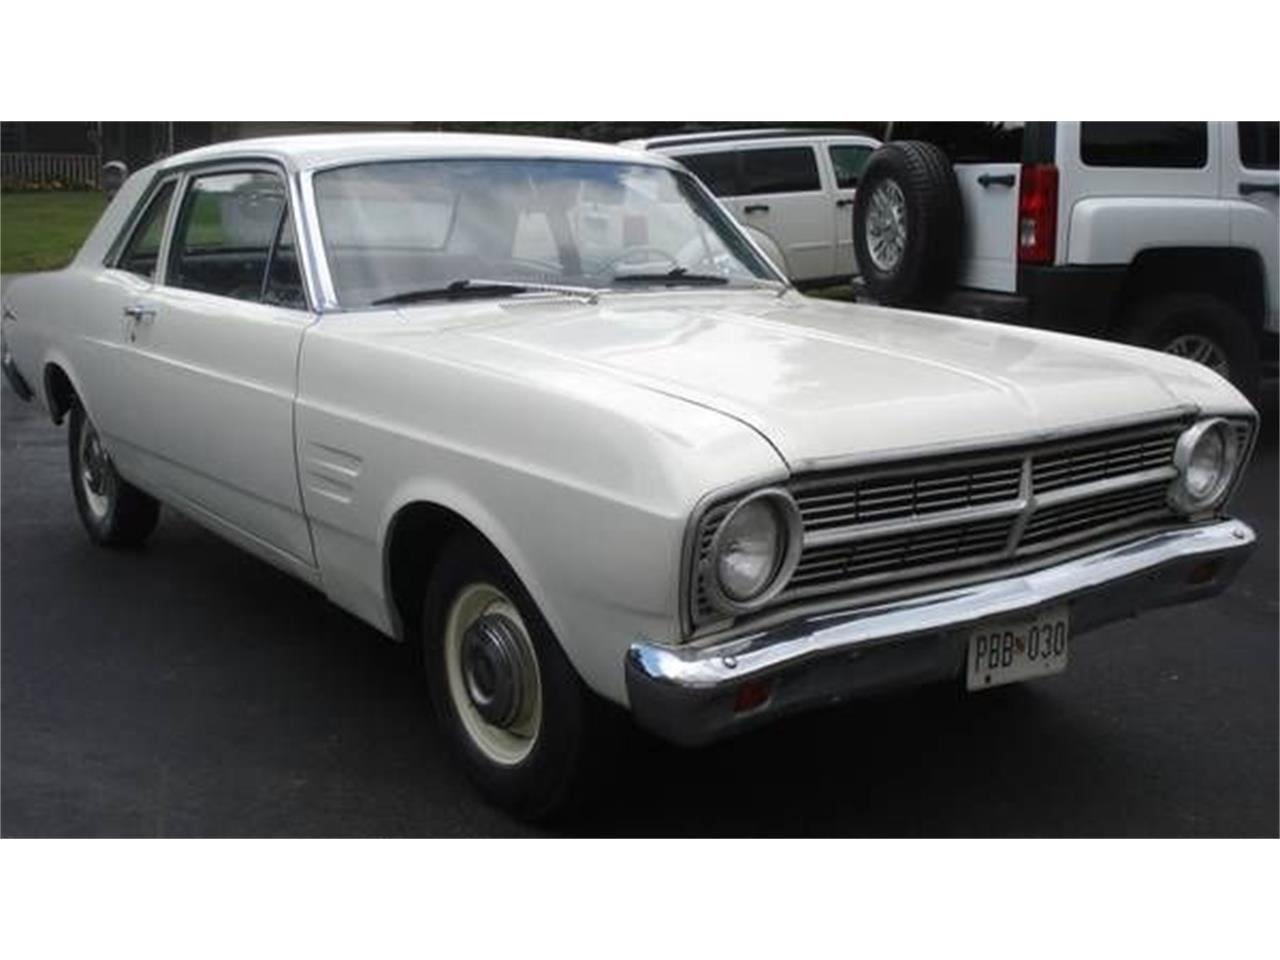 1967 ford falcon for sale classiccars com cc 1137321 1967 ford falcon for sale classiccars